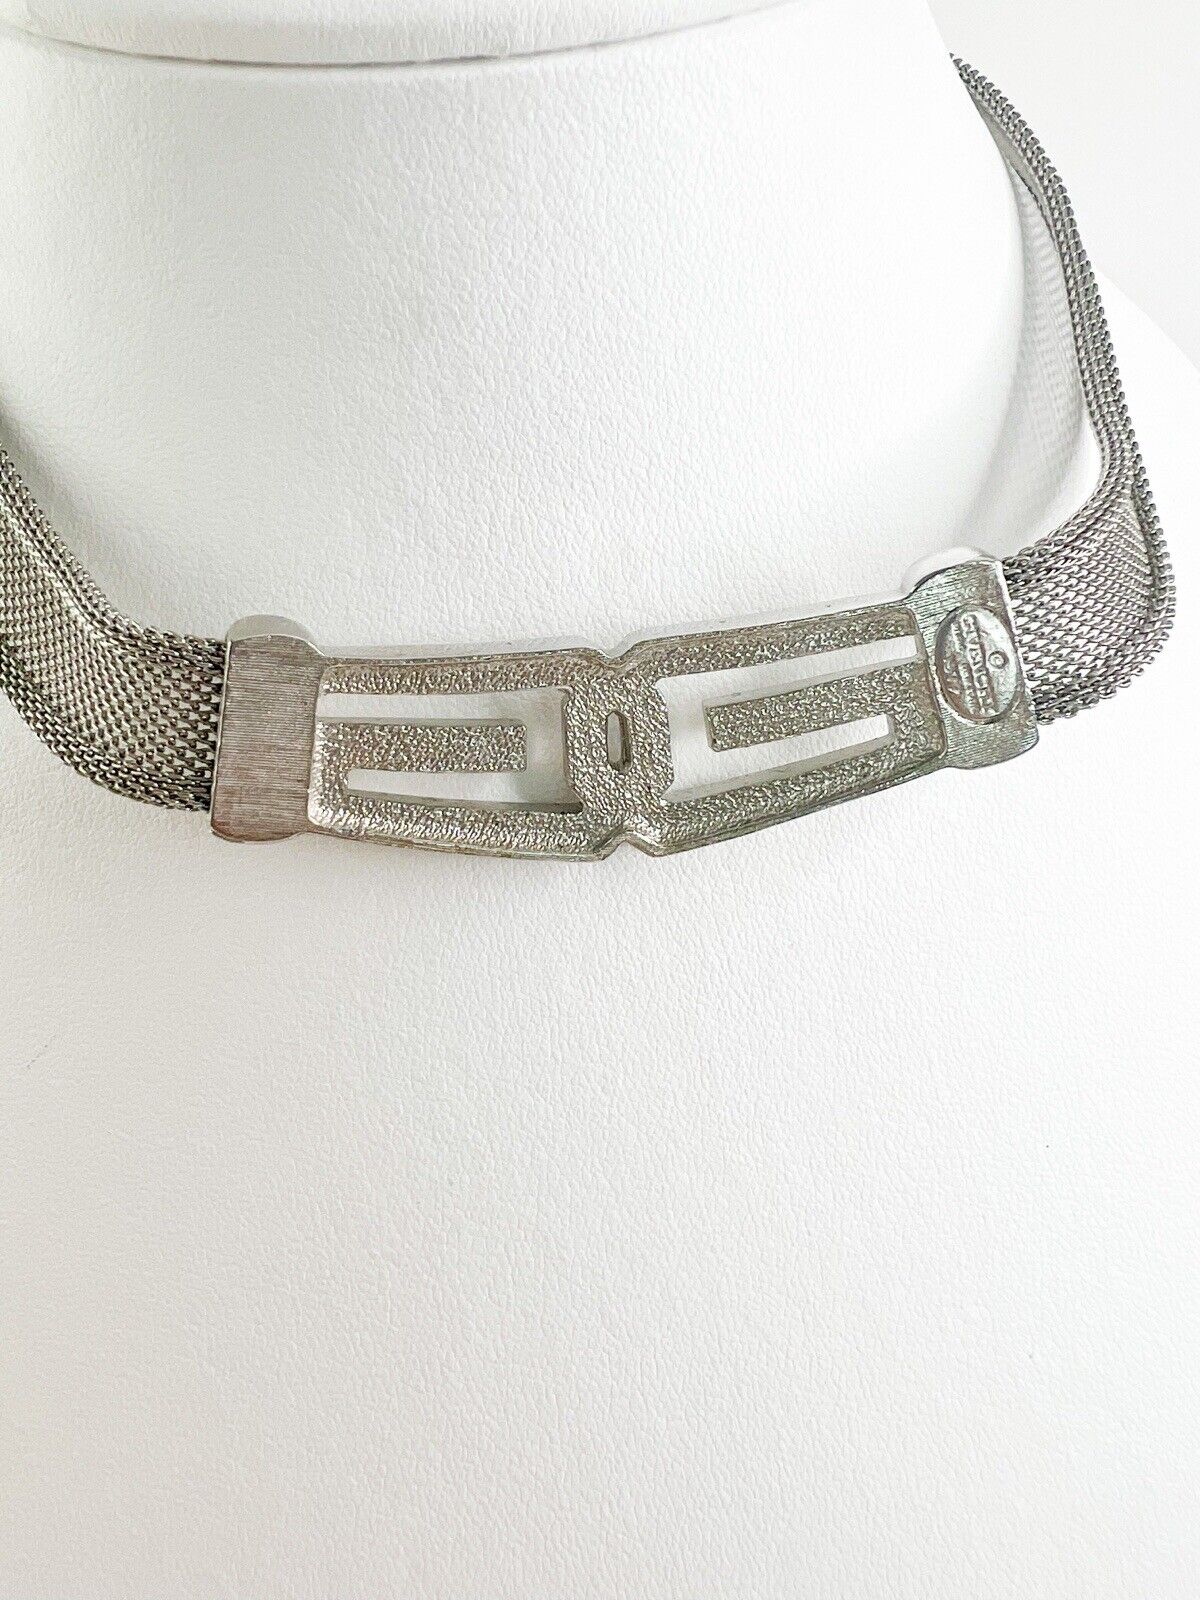 Givenchy Silver Tone 1977 Choker Necklace Vintage Extremely rare collectible